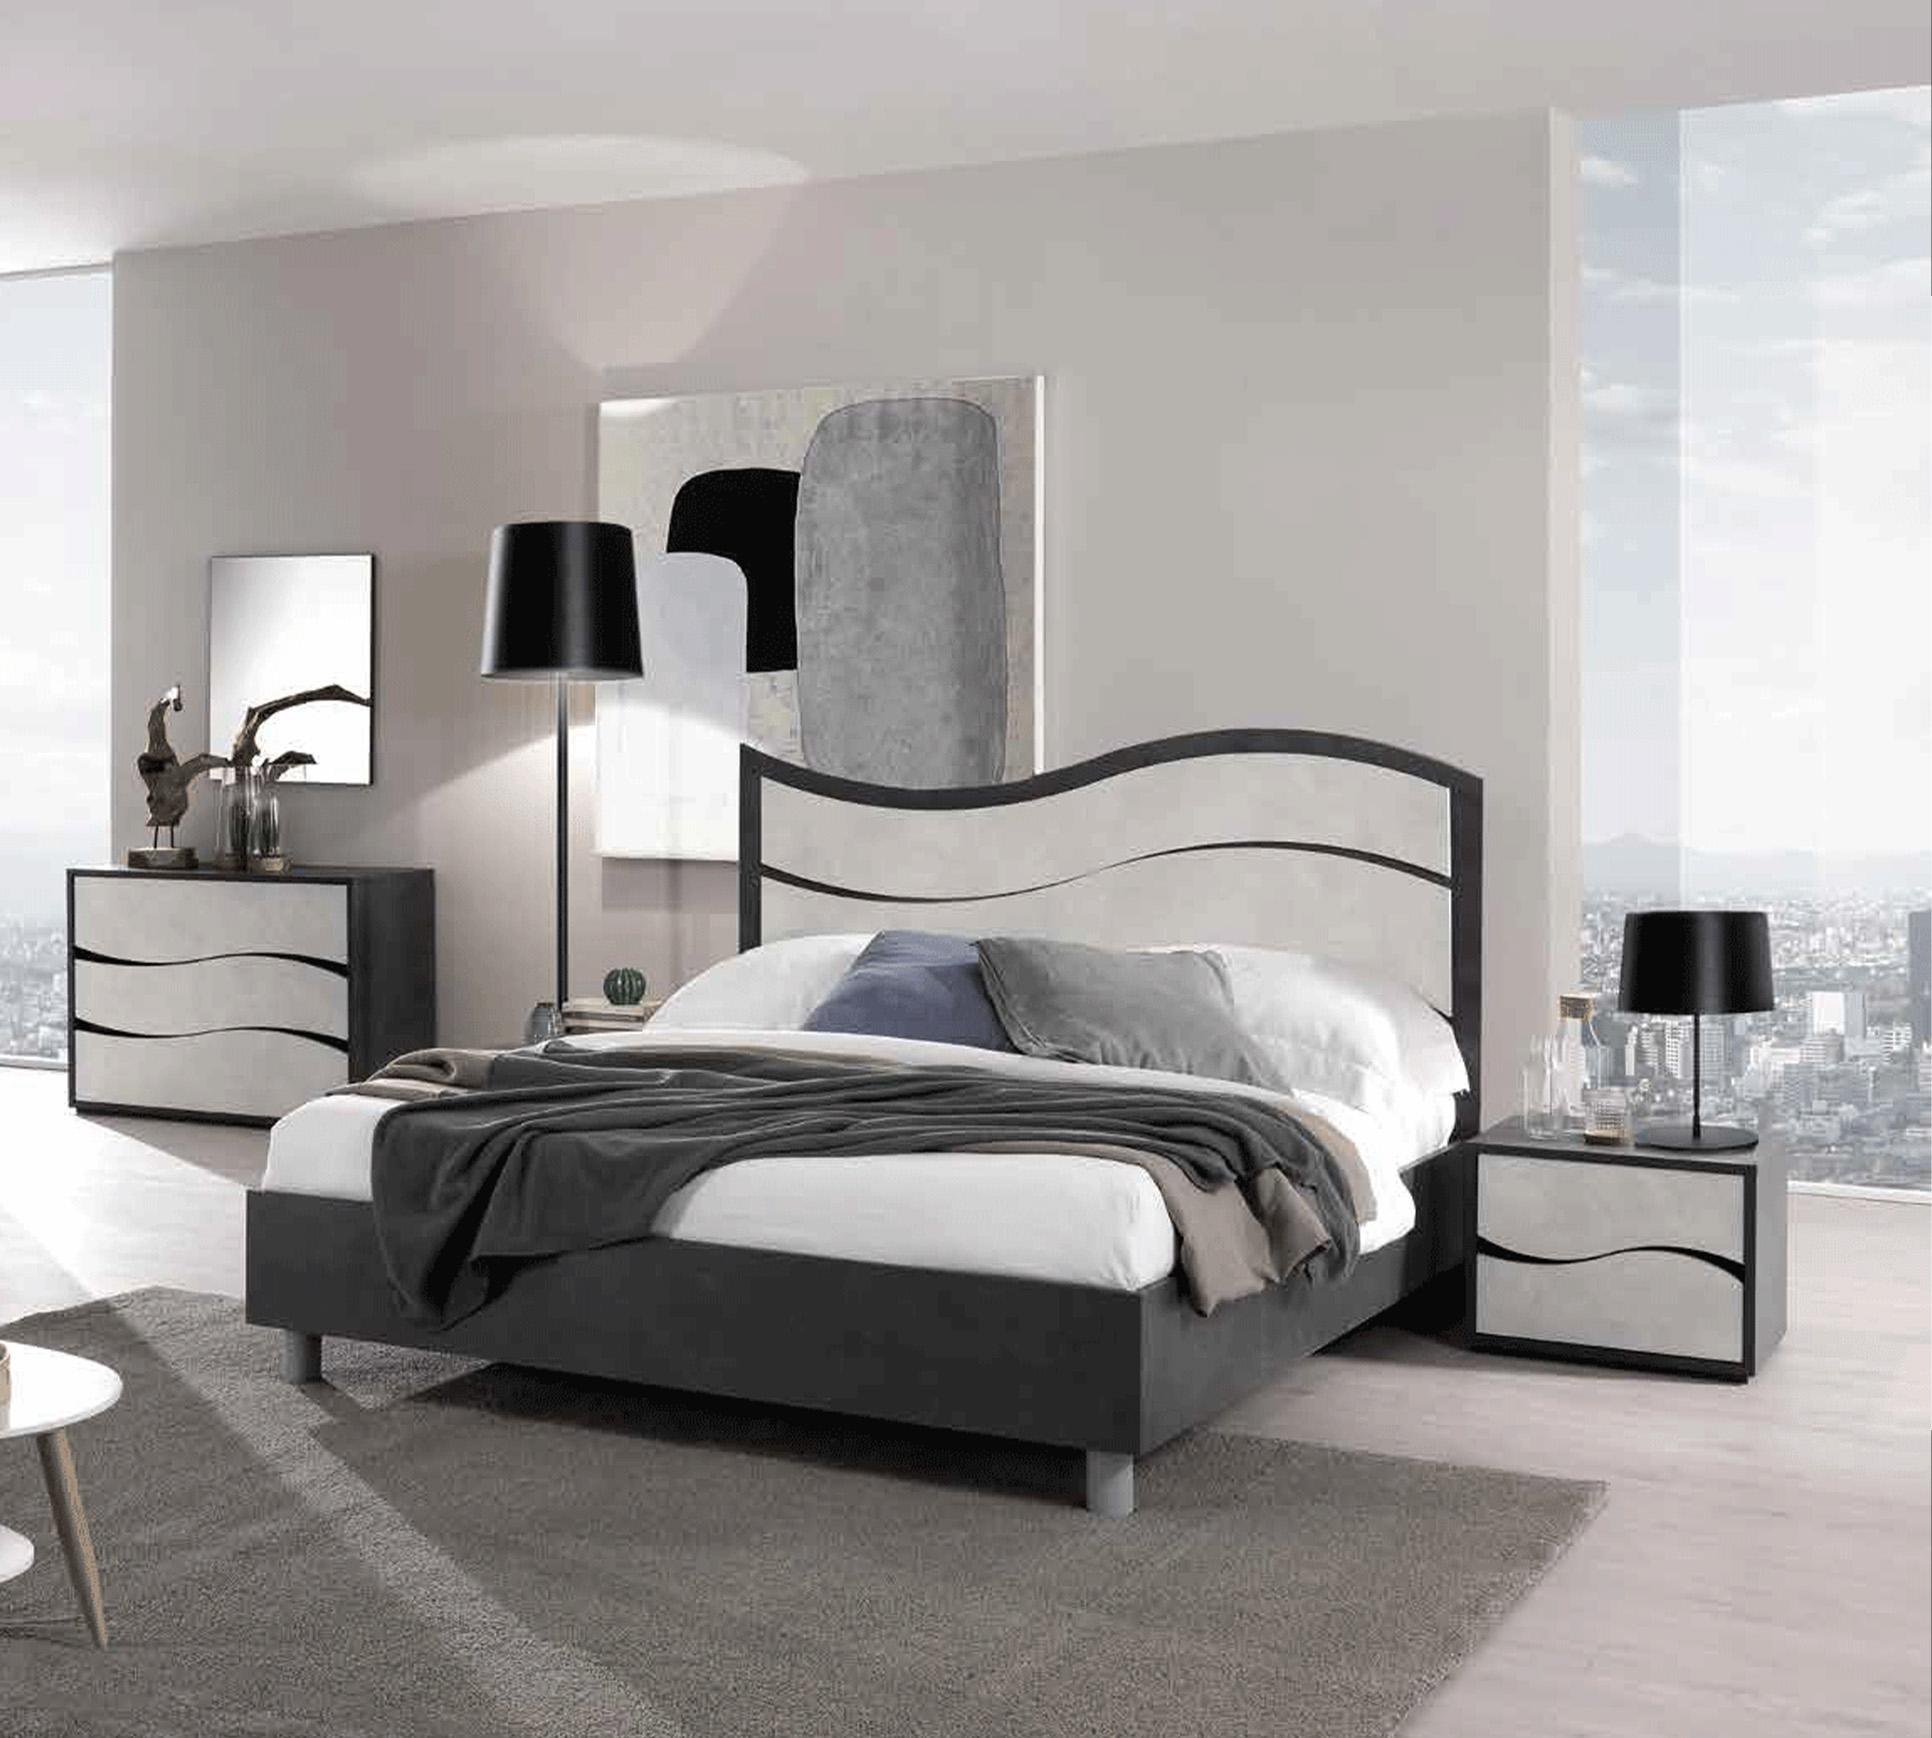 

    
Slate Grey & White Queen Bedroom Set 3 ISCHIA ESF Contemporary Made in ITALY
